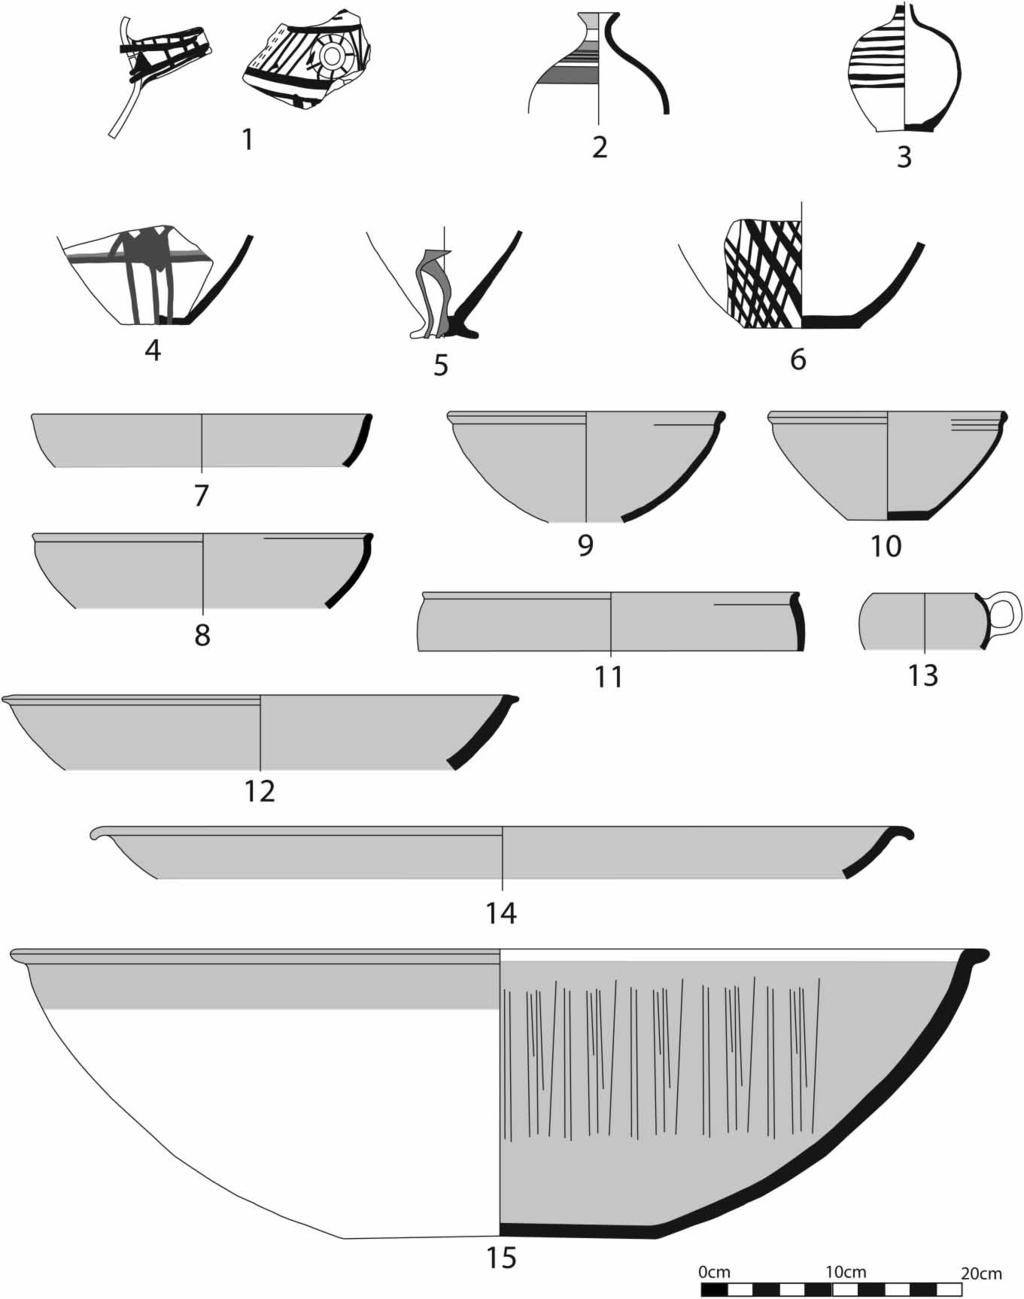 Figure 6 Characteristic forms associated with Painted Simple Ware (1 7) and Smeared Wash Ware (8 15) at Tell Tayinat in EBIVB.